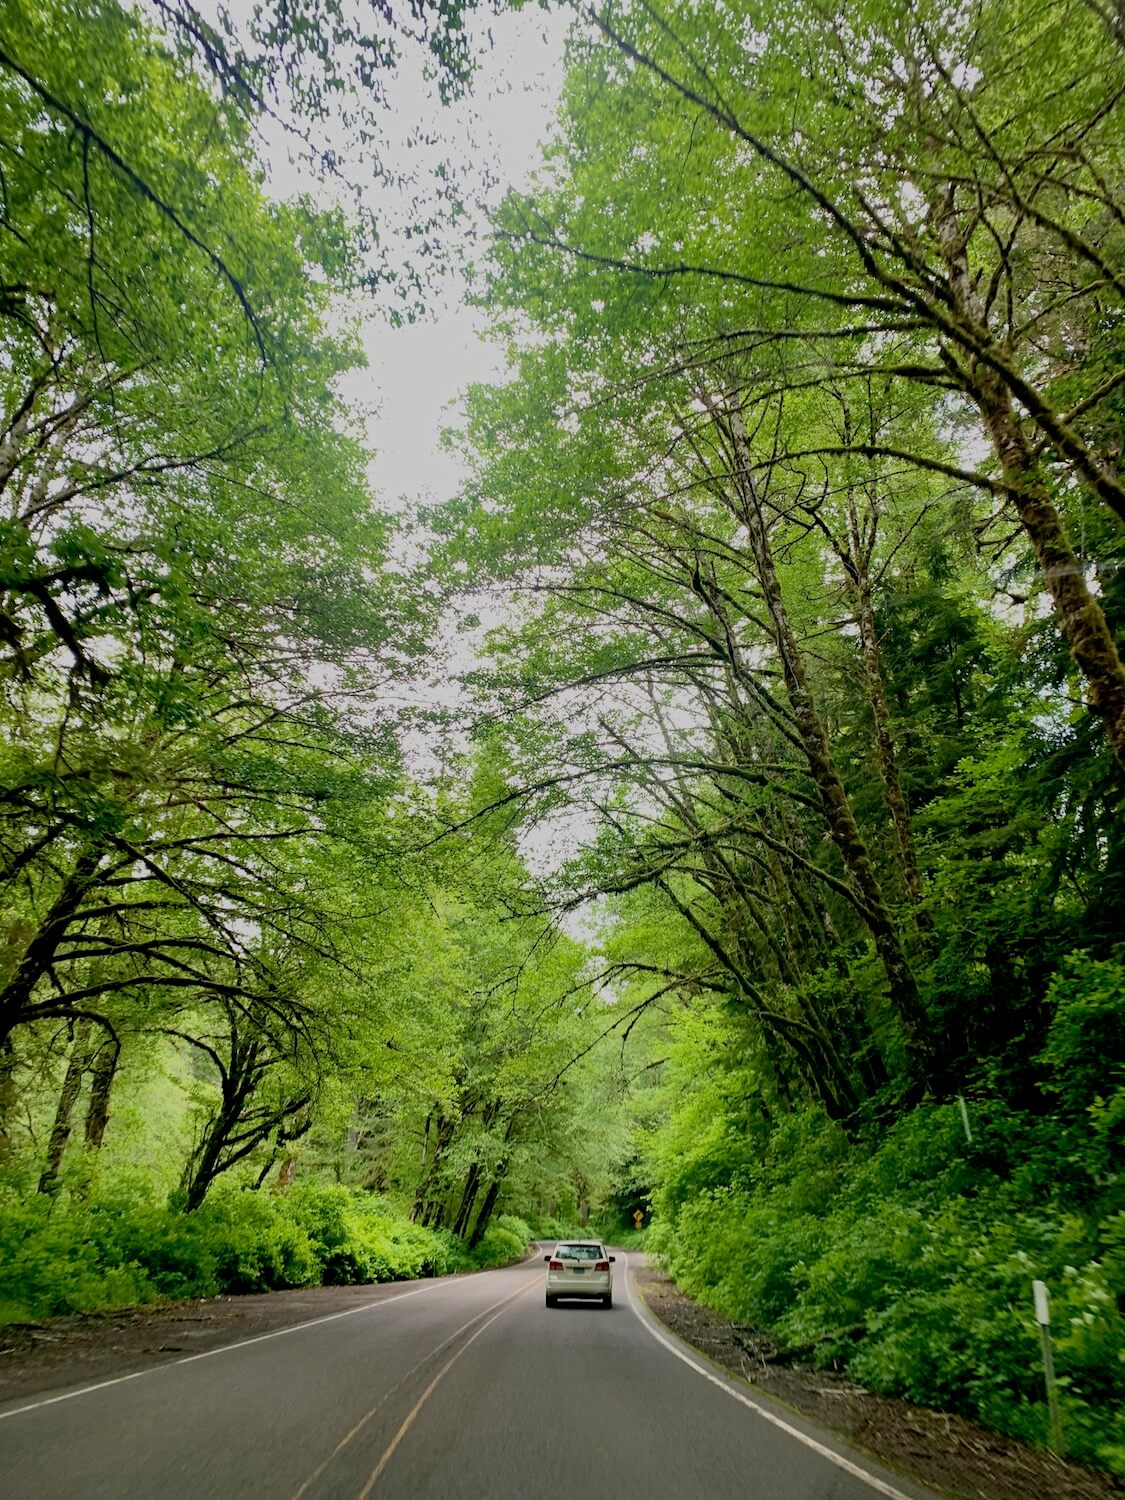 Highway 6 winds from Portland Oregon to Tillamook and large alder and maple trees rise high above the gray pavement while a white car drives ahead.